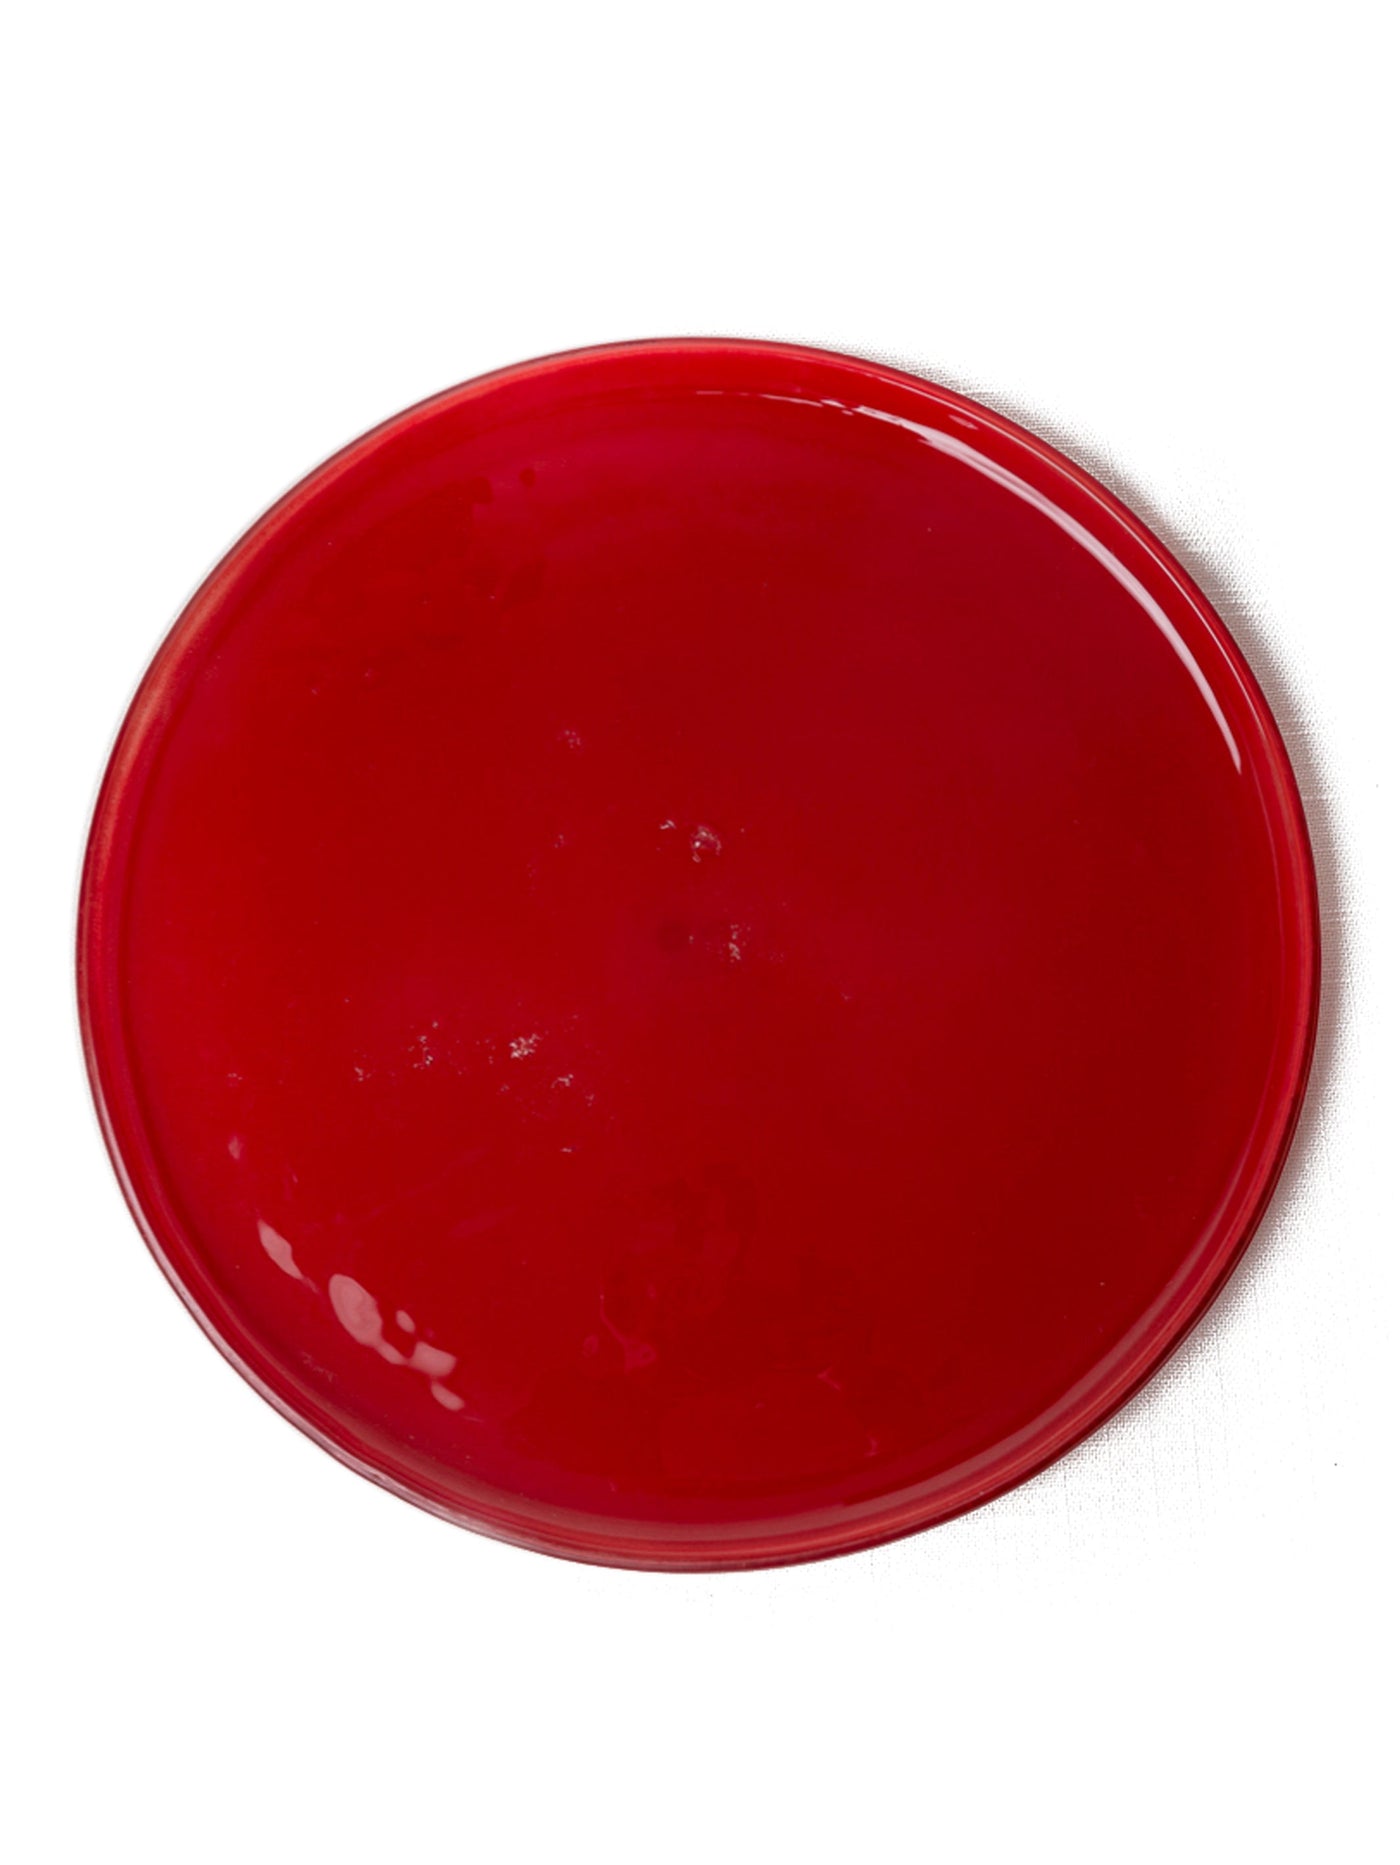 Handmade Glass Salad/Dessert Plate in Red by Caju Collective